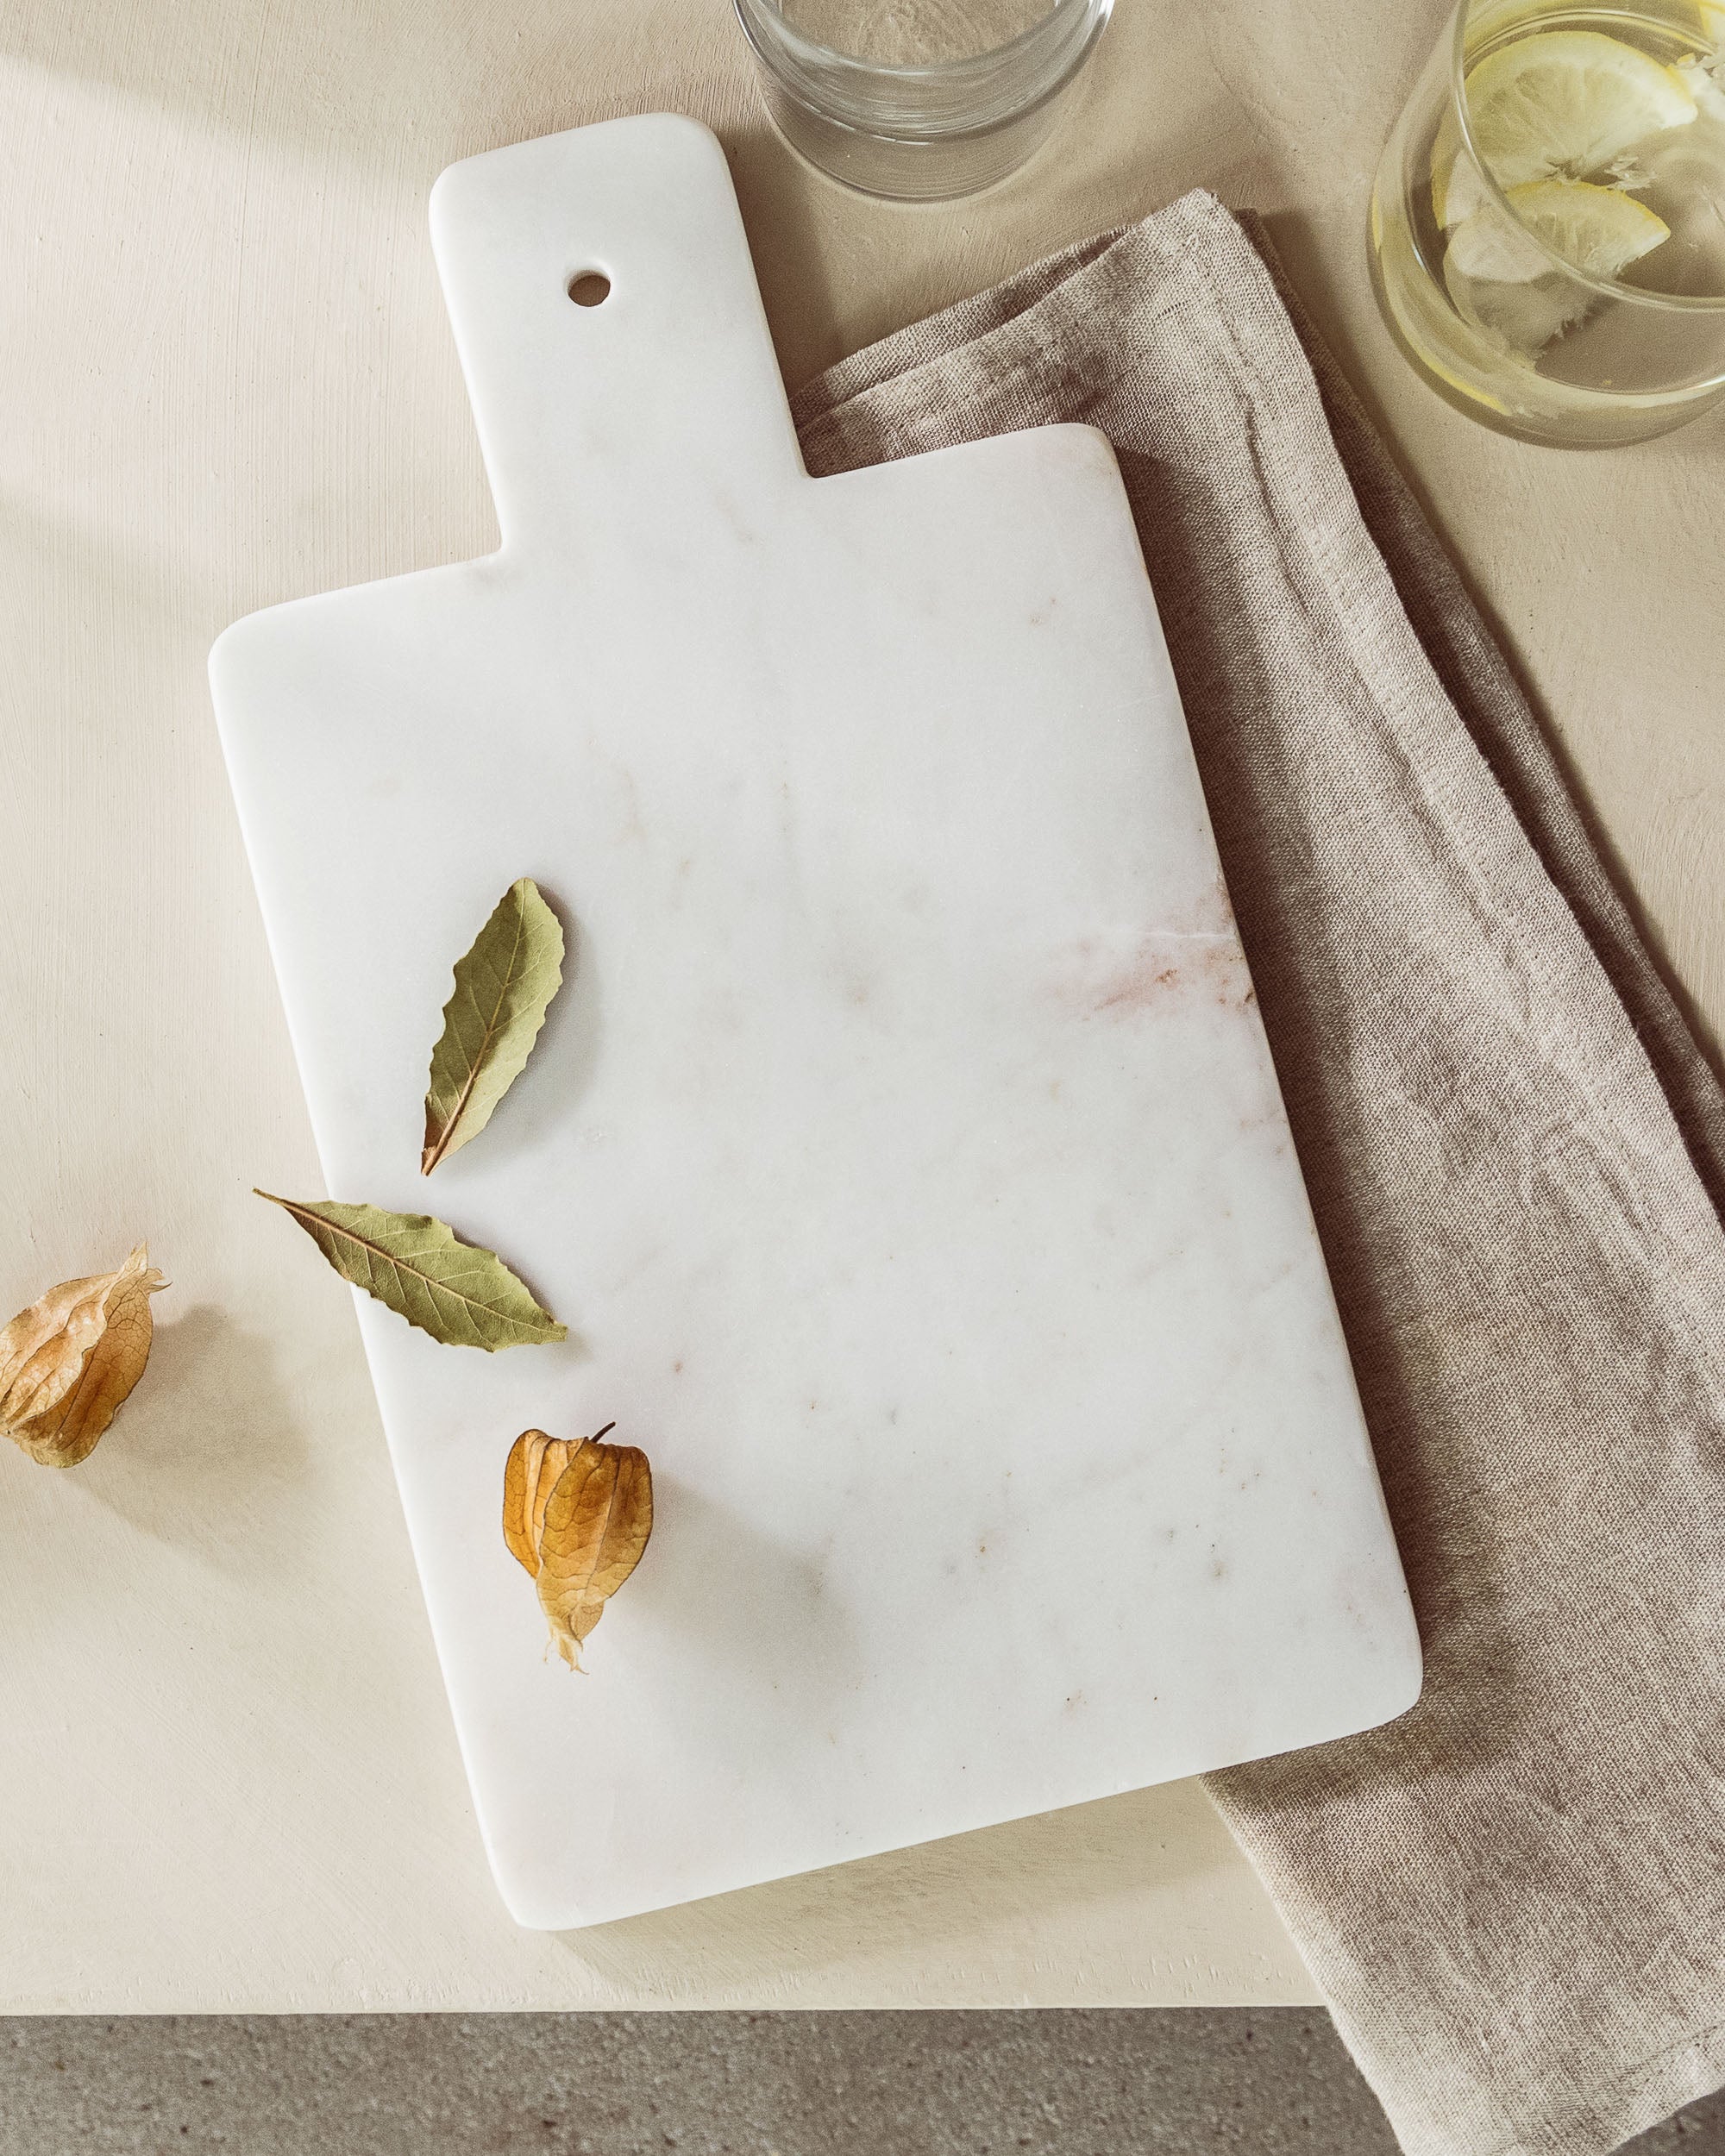 Serving Plate/Cutting Board - White Marble